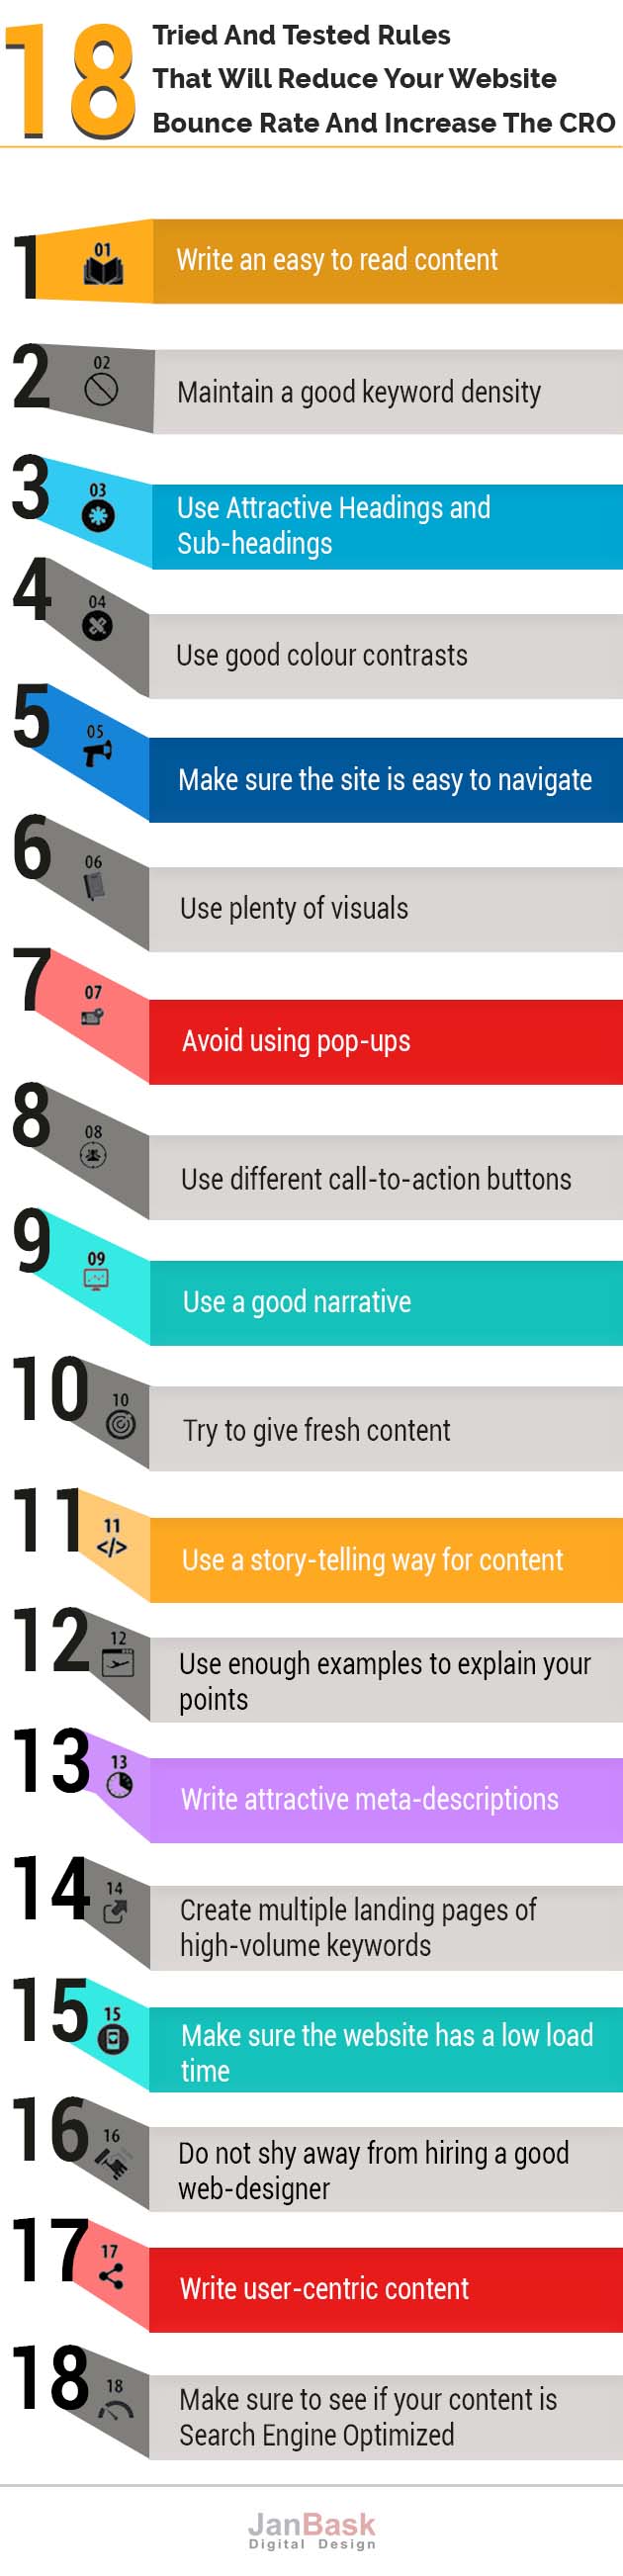 18 Ways to Reduce Bounce Rate & Increase Conversion Rate - Infographic